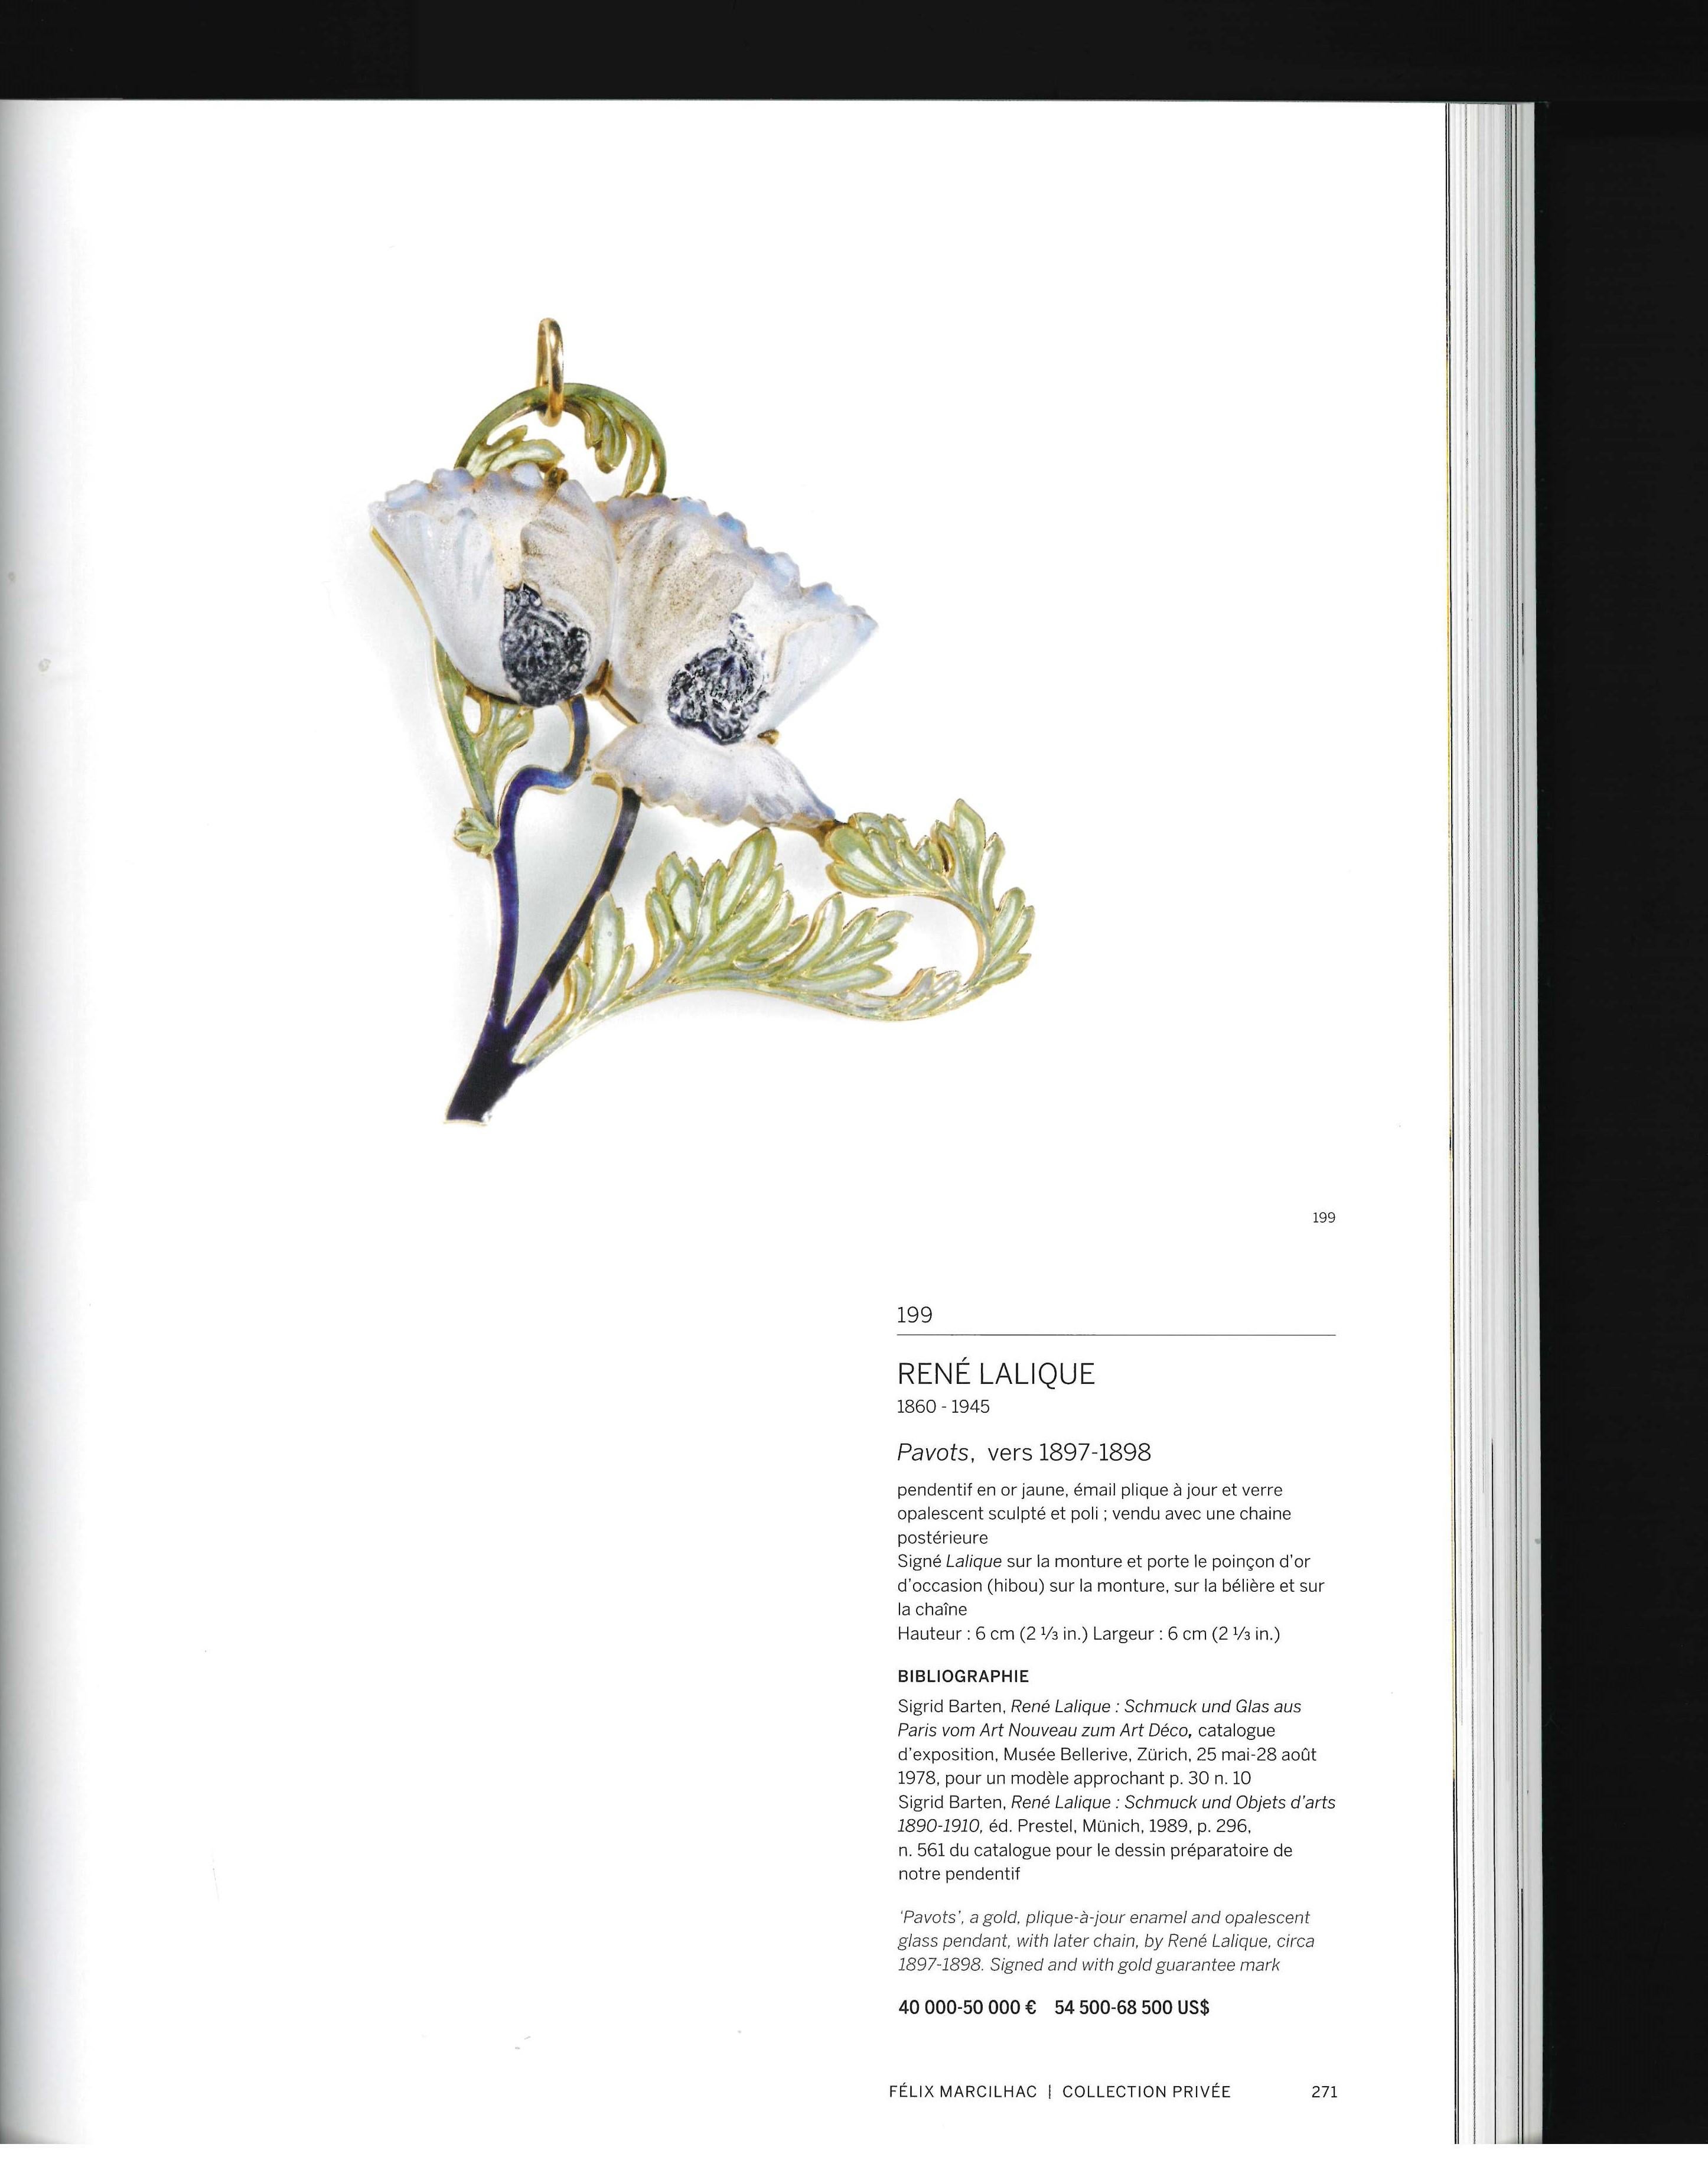 Felix Marcilhac Collection Privee, Sotheby's (Book) For Sale 2